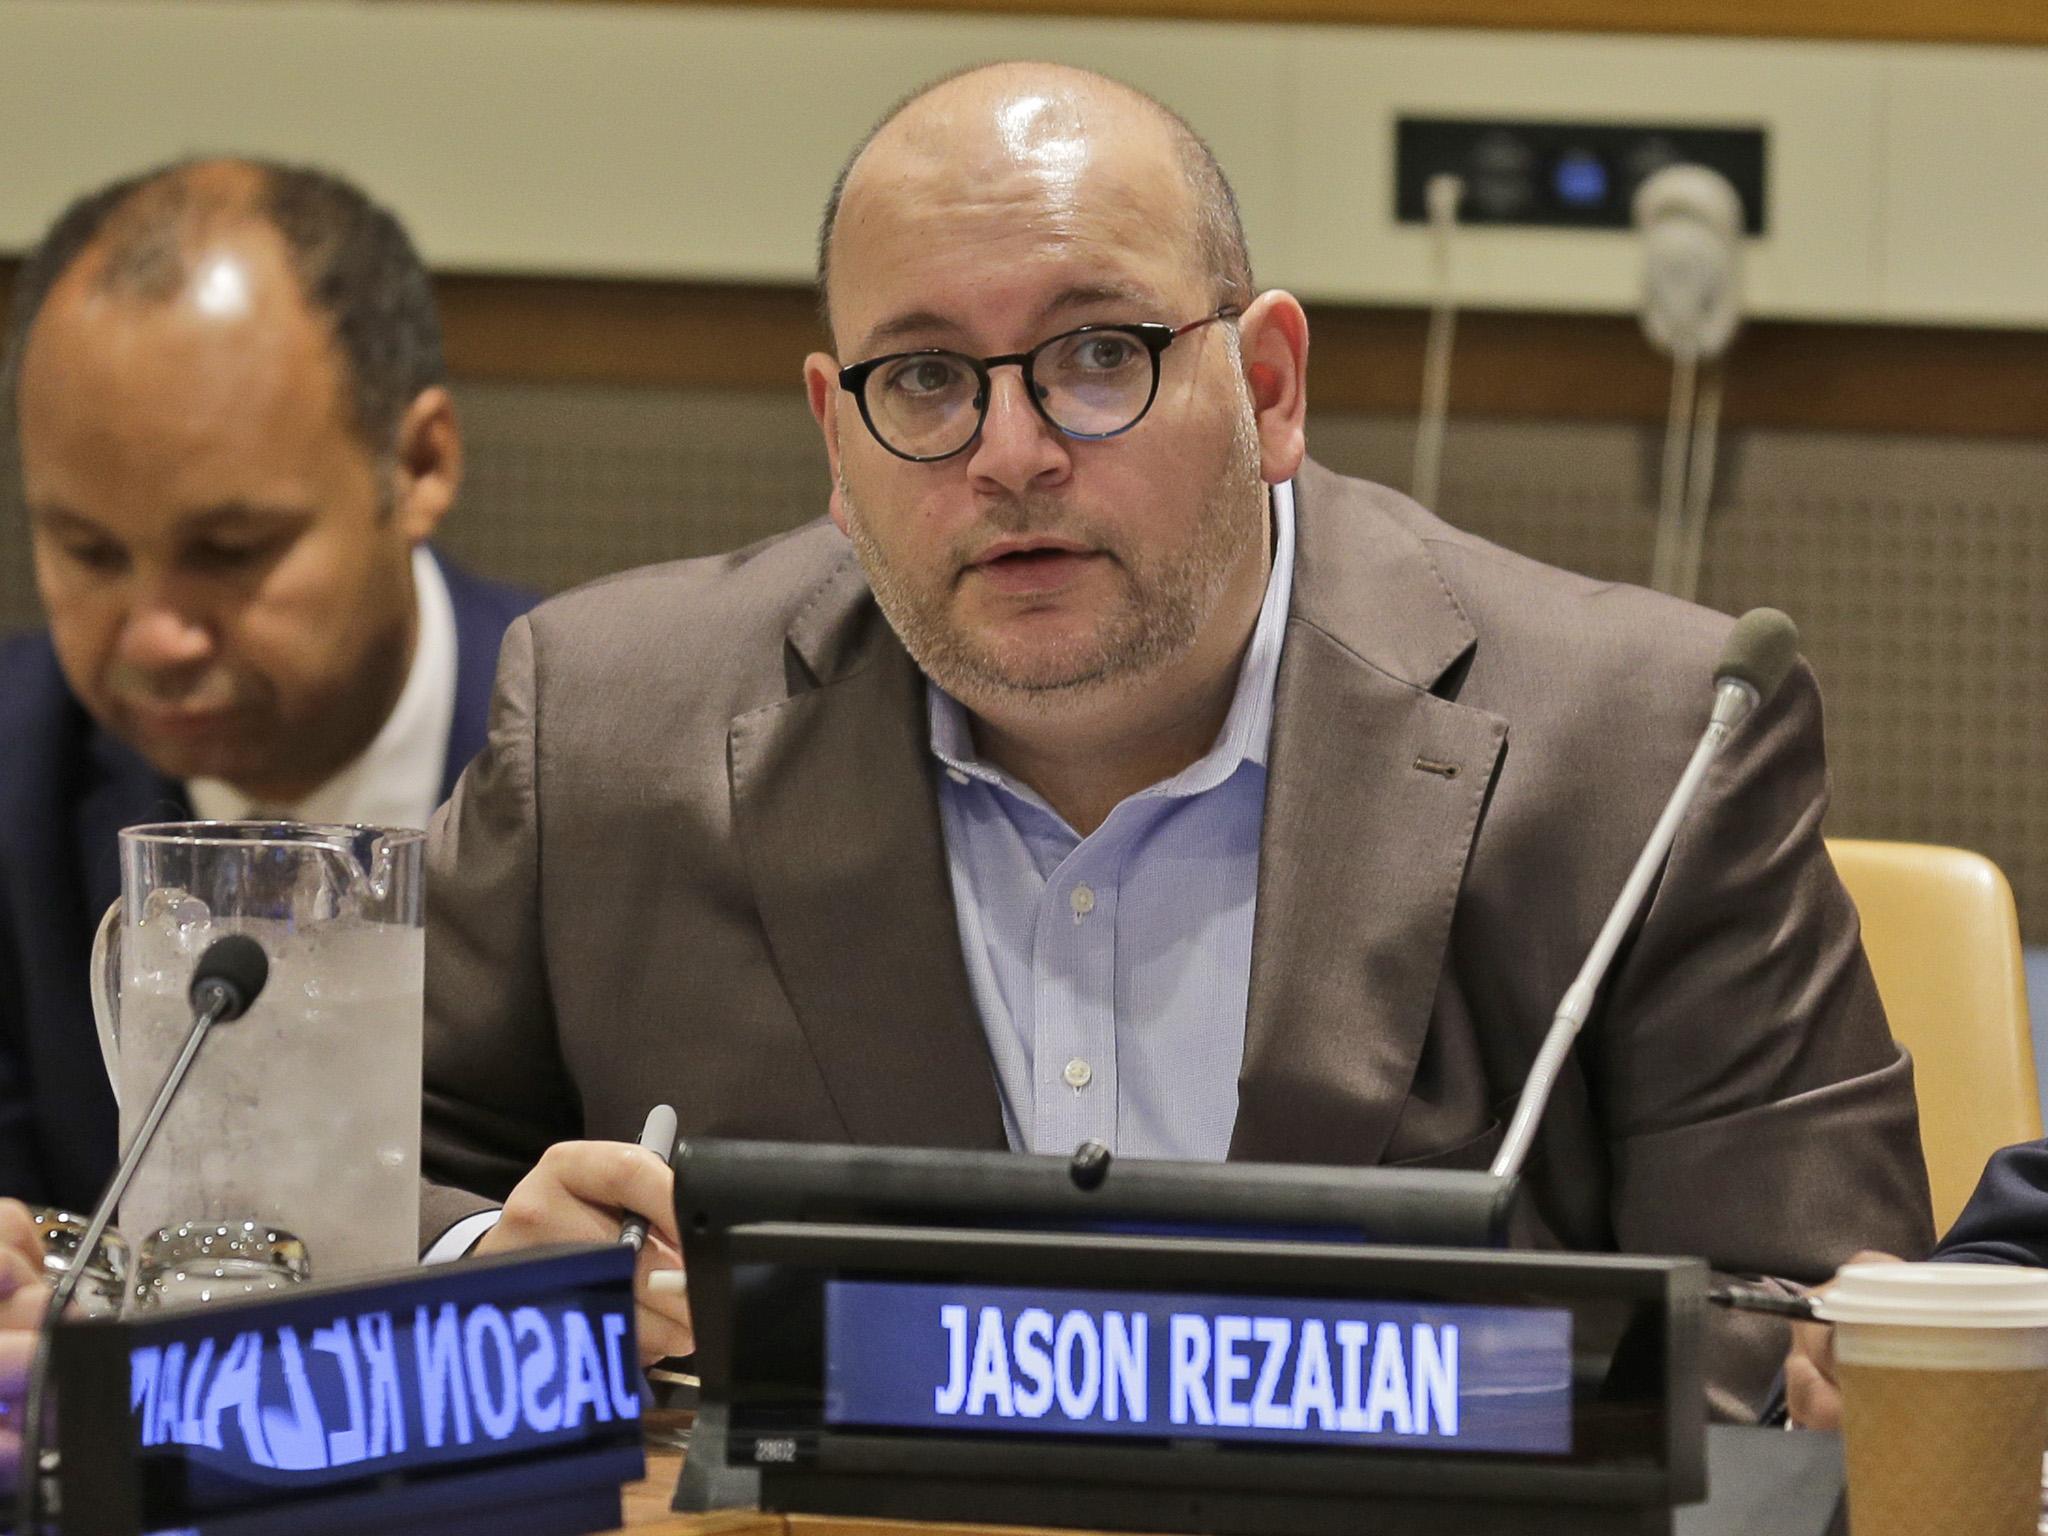 Mr Rezaian was subjected to solitary confinement and was denied medical care in prison